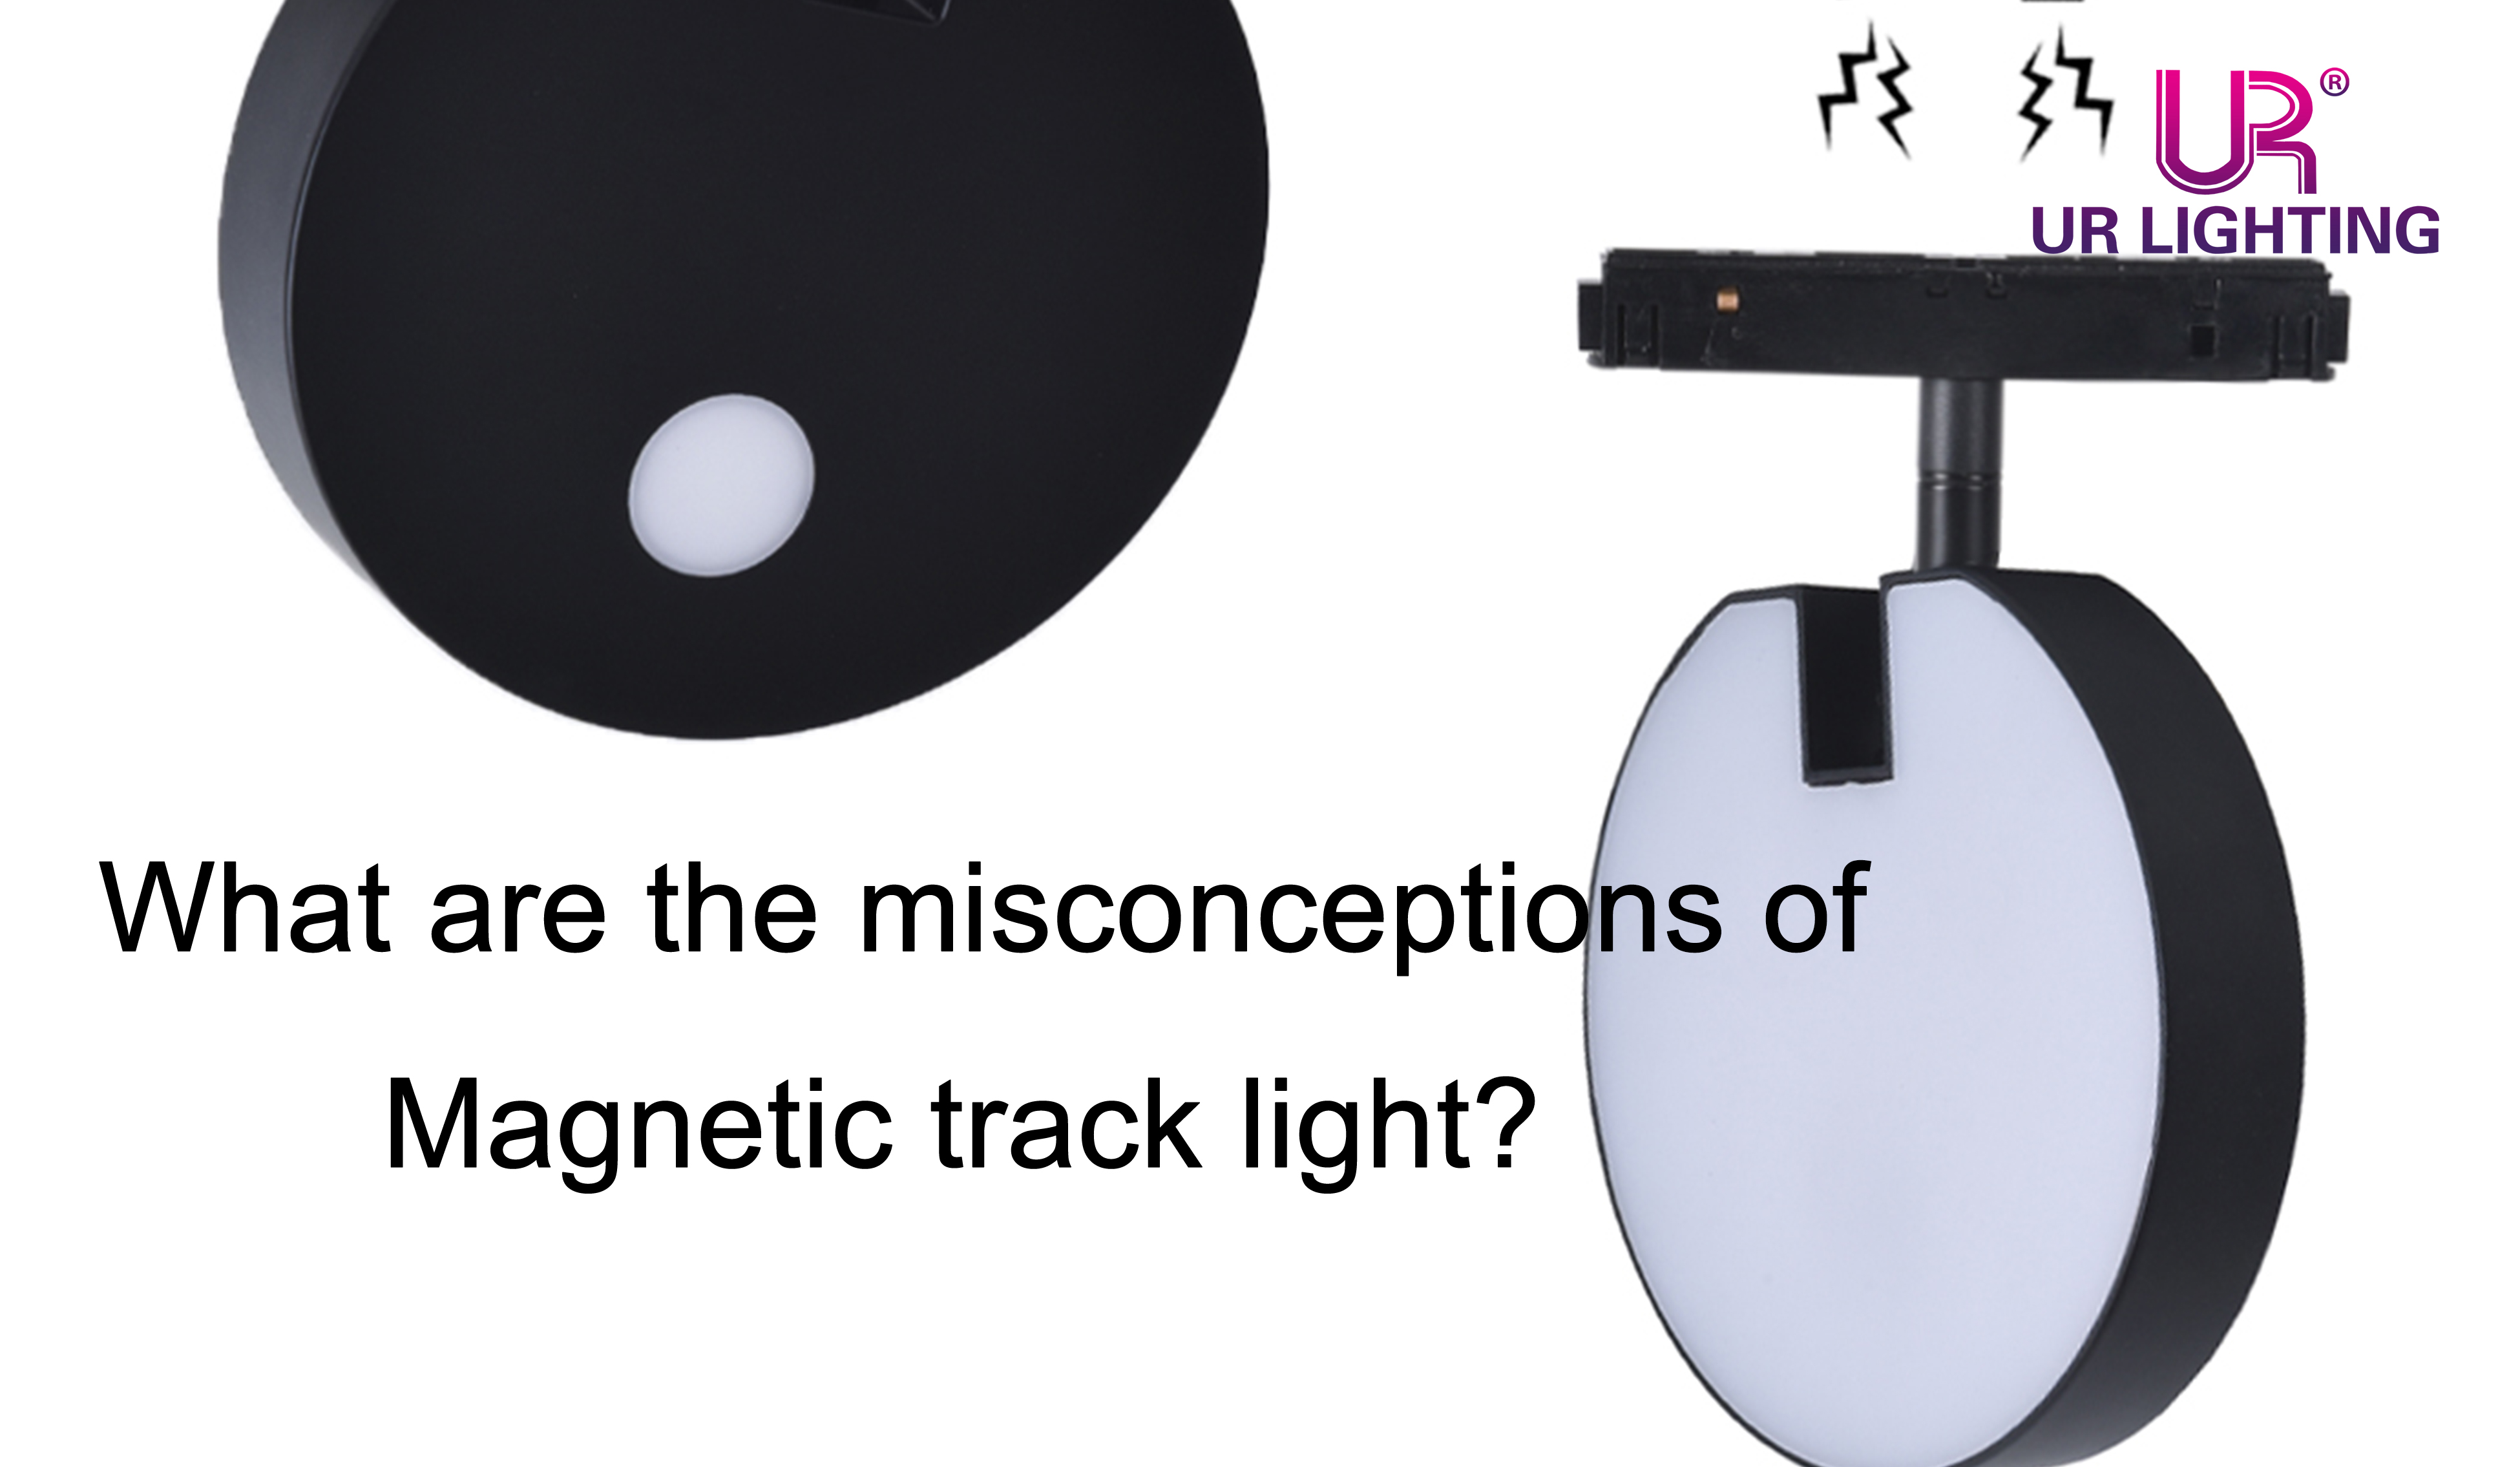 What are the misconceptions of Magnetic track light?